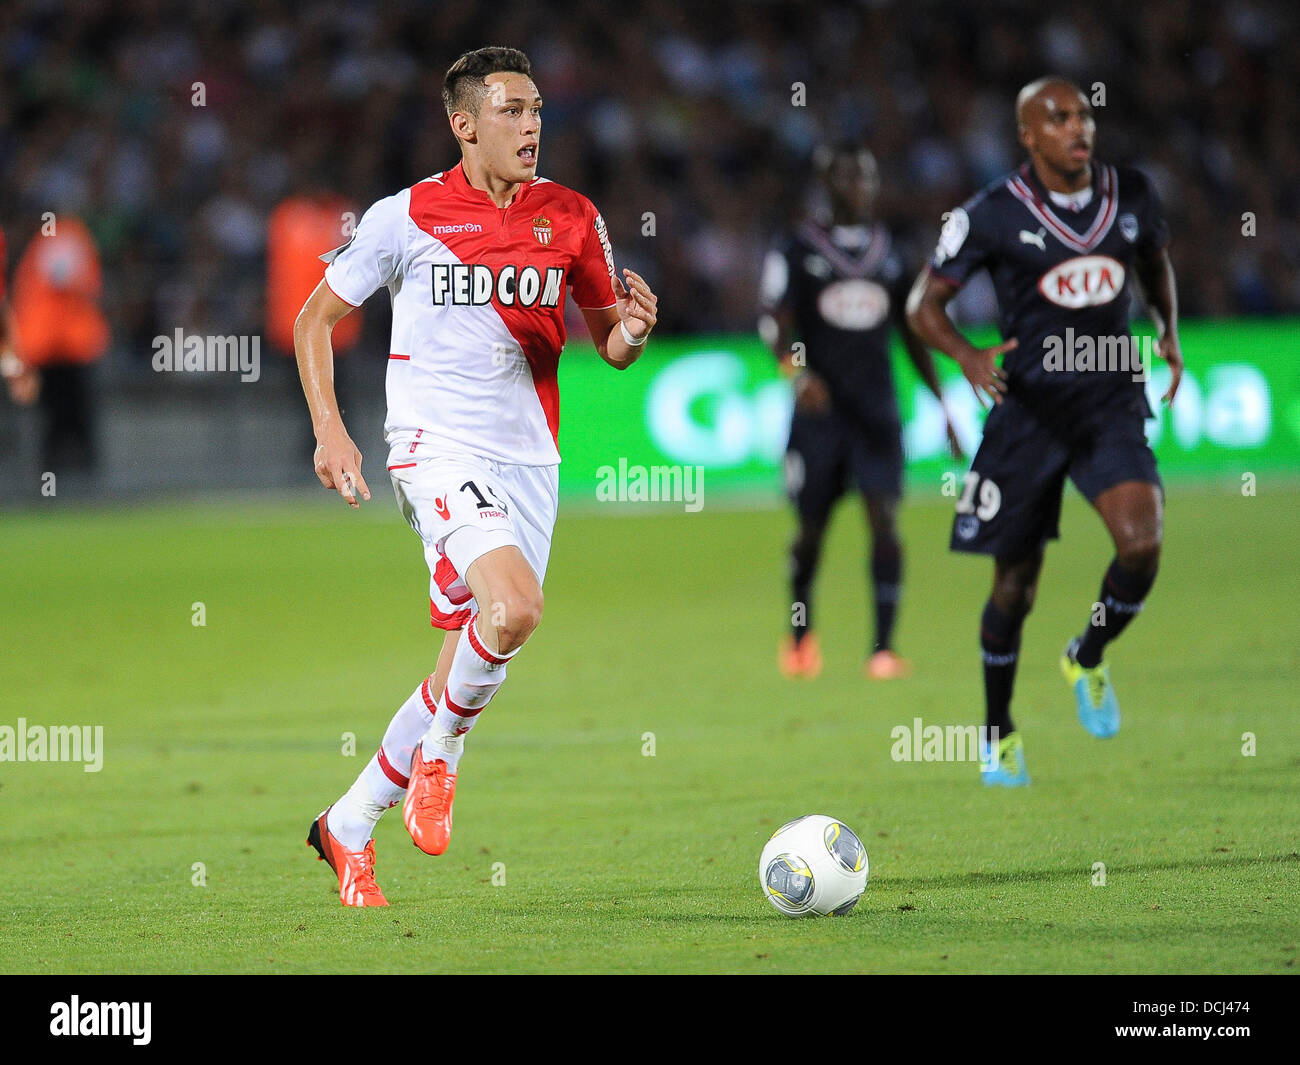 18.08.2013 Monaco. Lucas OCAMPOS during the French Ligue 1 game between Monaco and Montpellier from the Stade Louis II stadium. Stock Photo